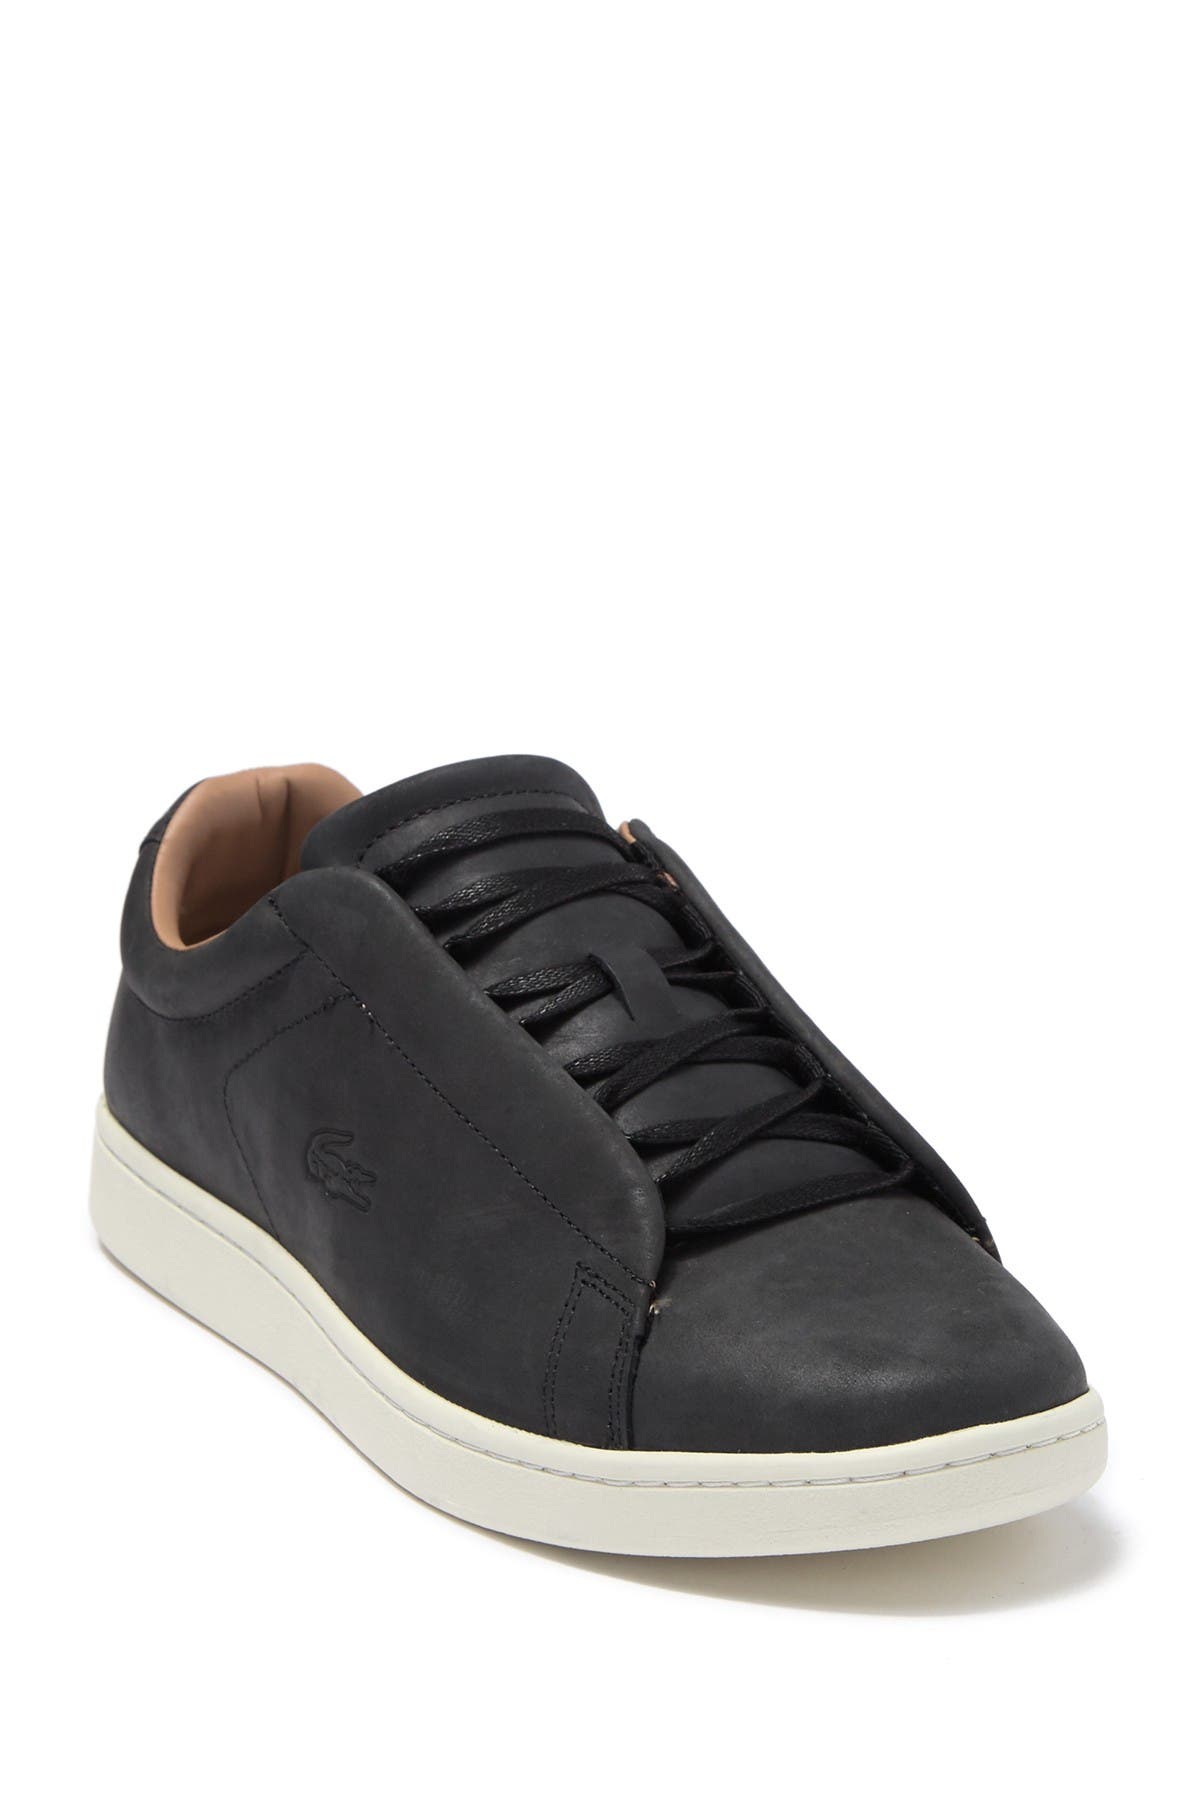 Lacoste | Carnaby EVO Easy Leather 